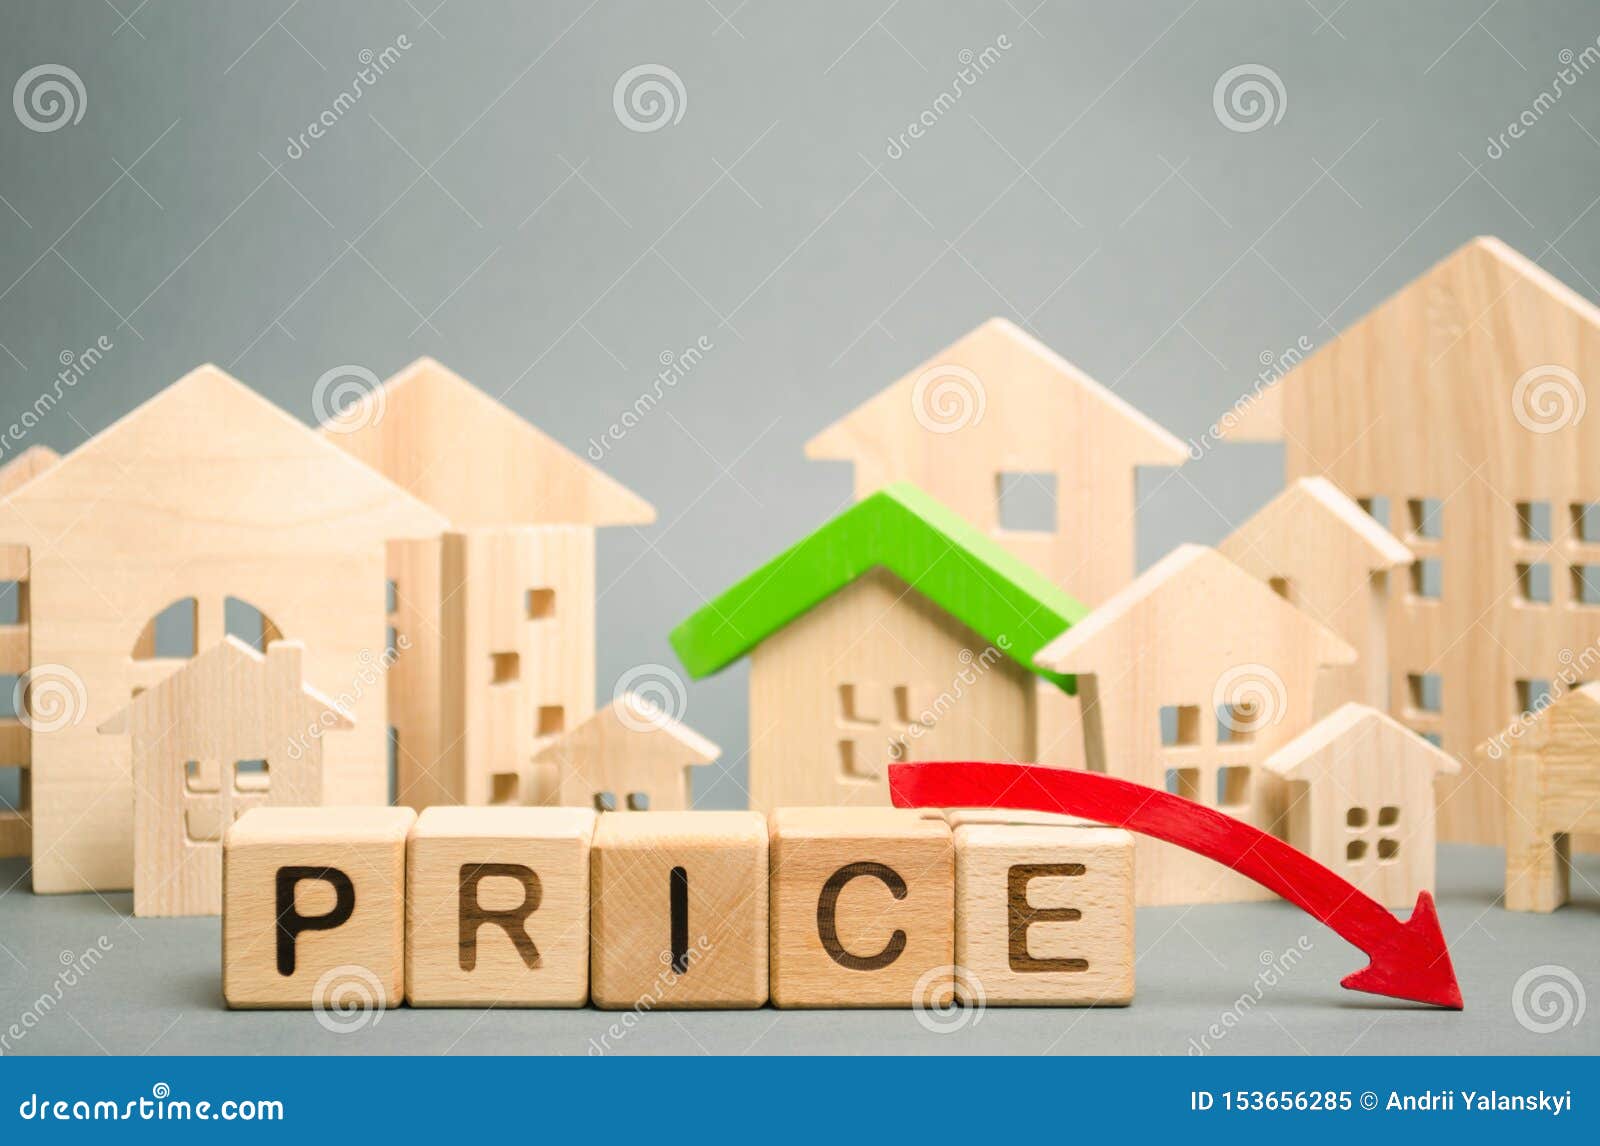 wooden blocks with the word price, down arrow and miniature houses. reduced housing prices. the fall and crisis of the real estate